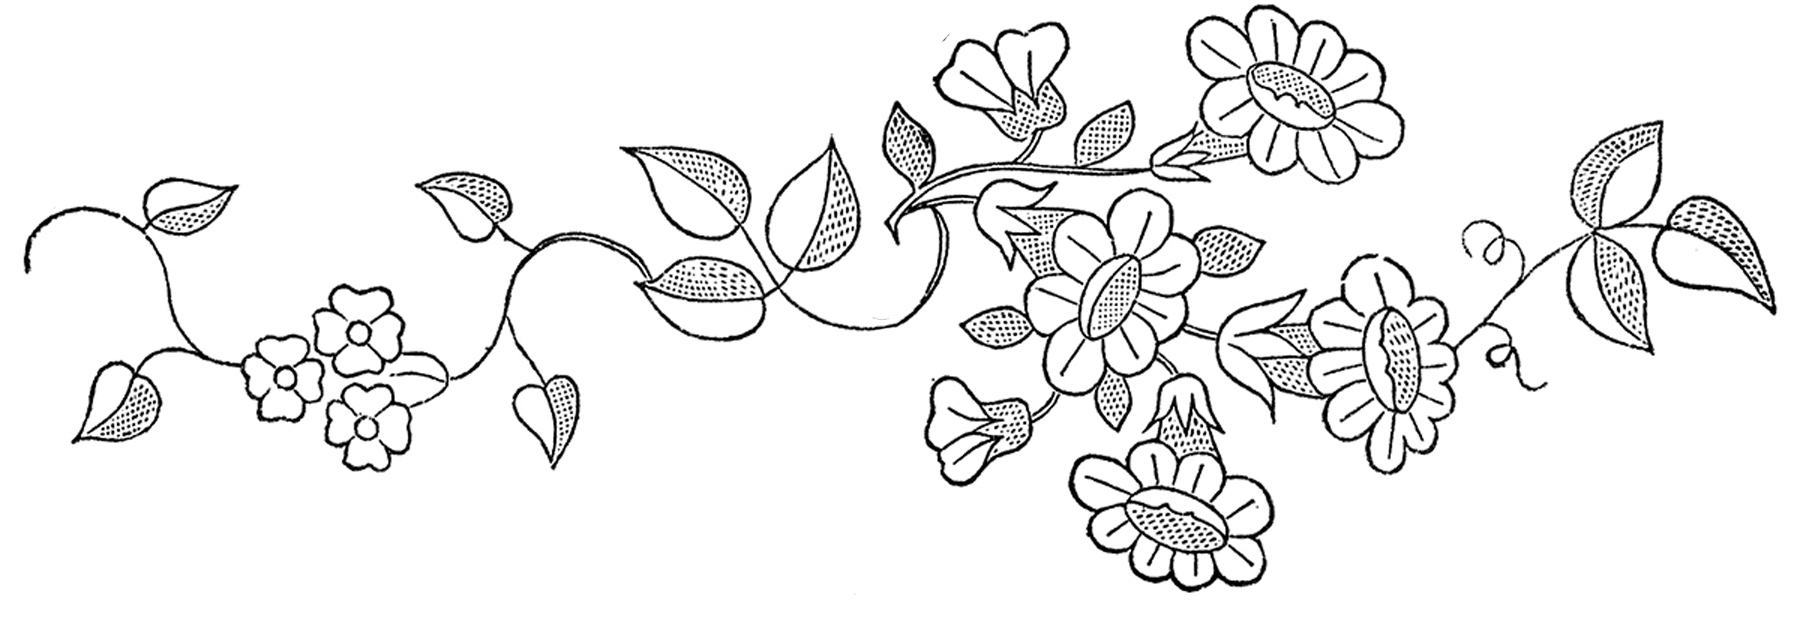 Custom Embroidery Patterns Hand Embroidery Patterns Digitemb